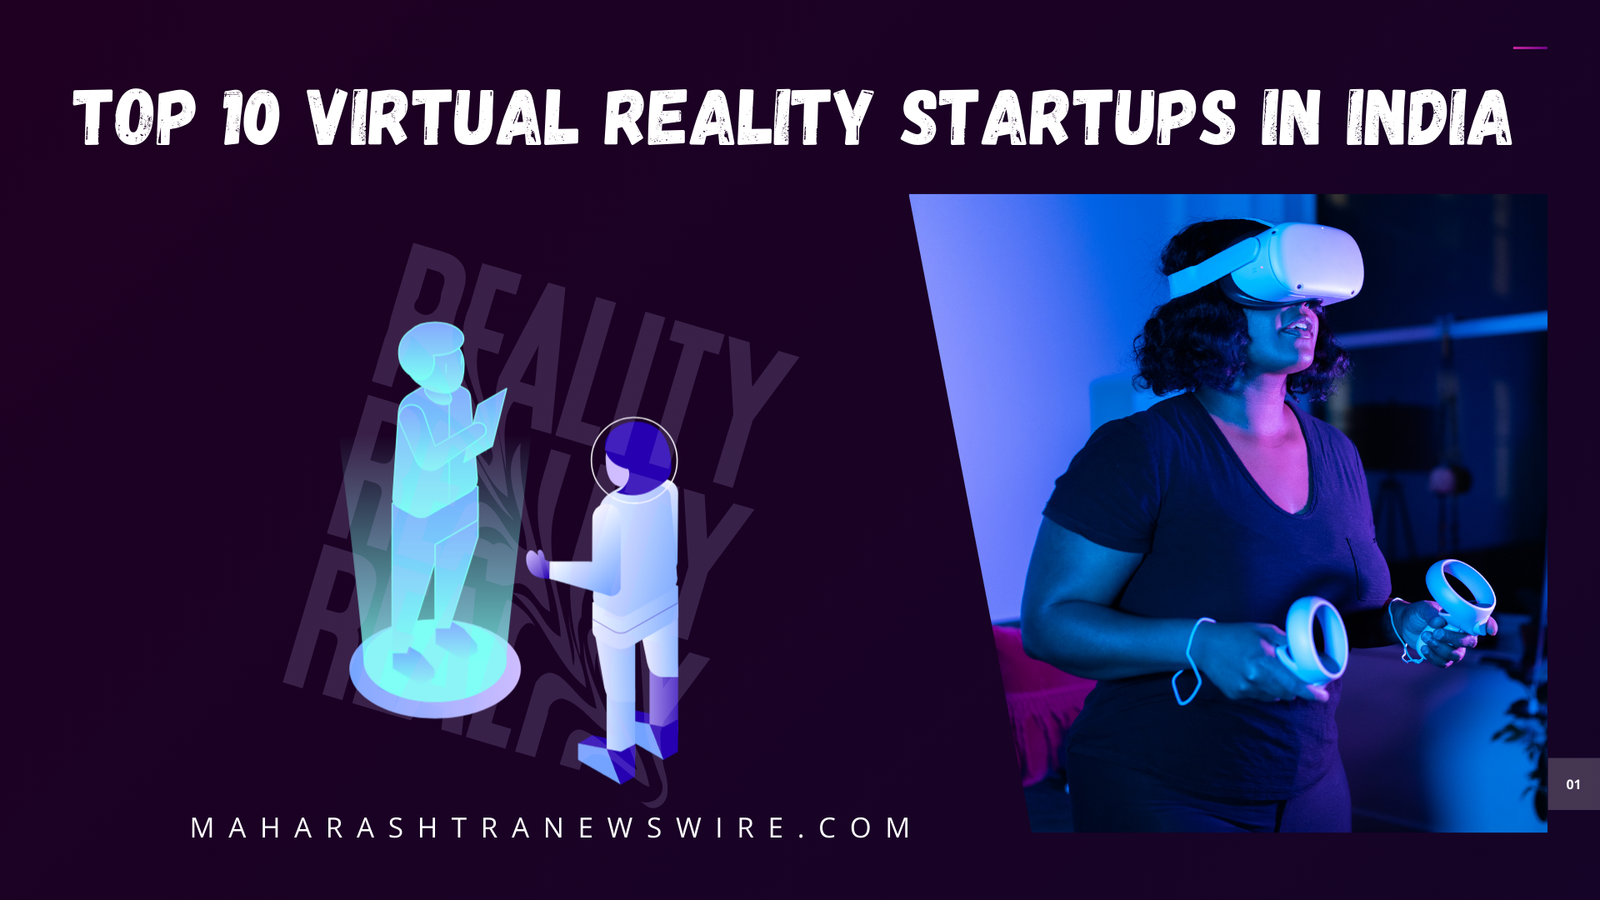 Top 10 Virtual Reality Startups in India